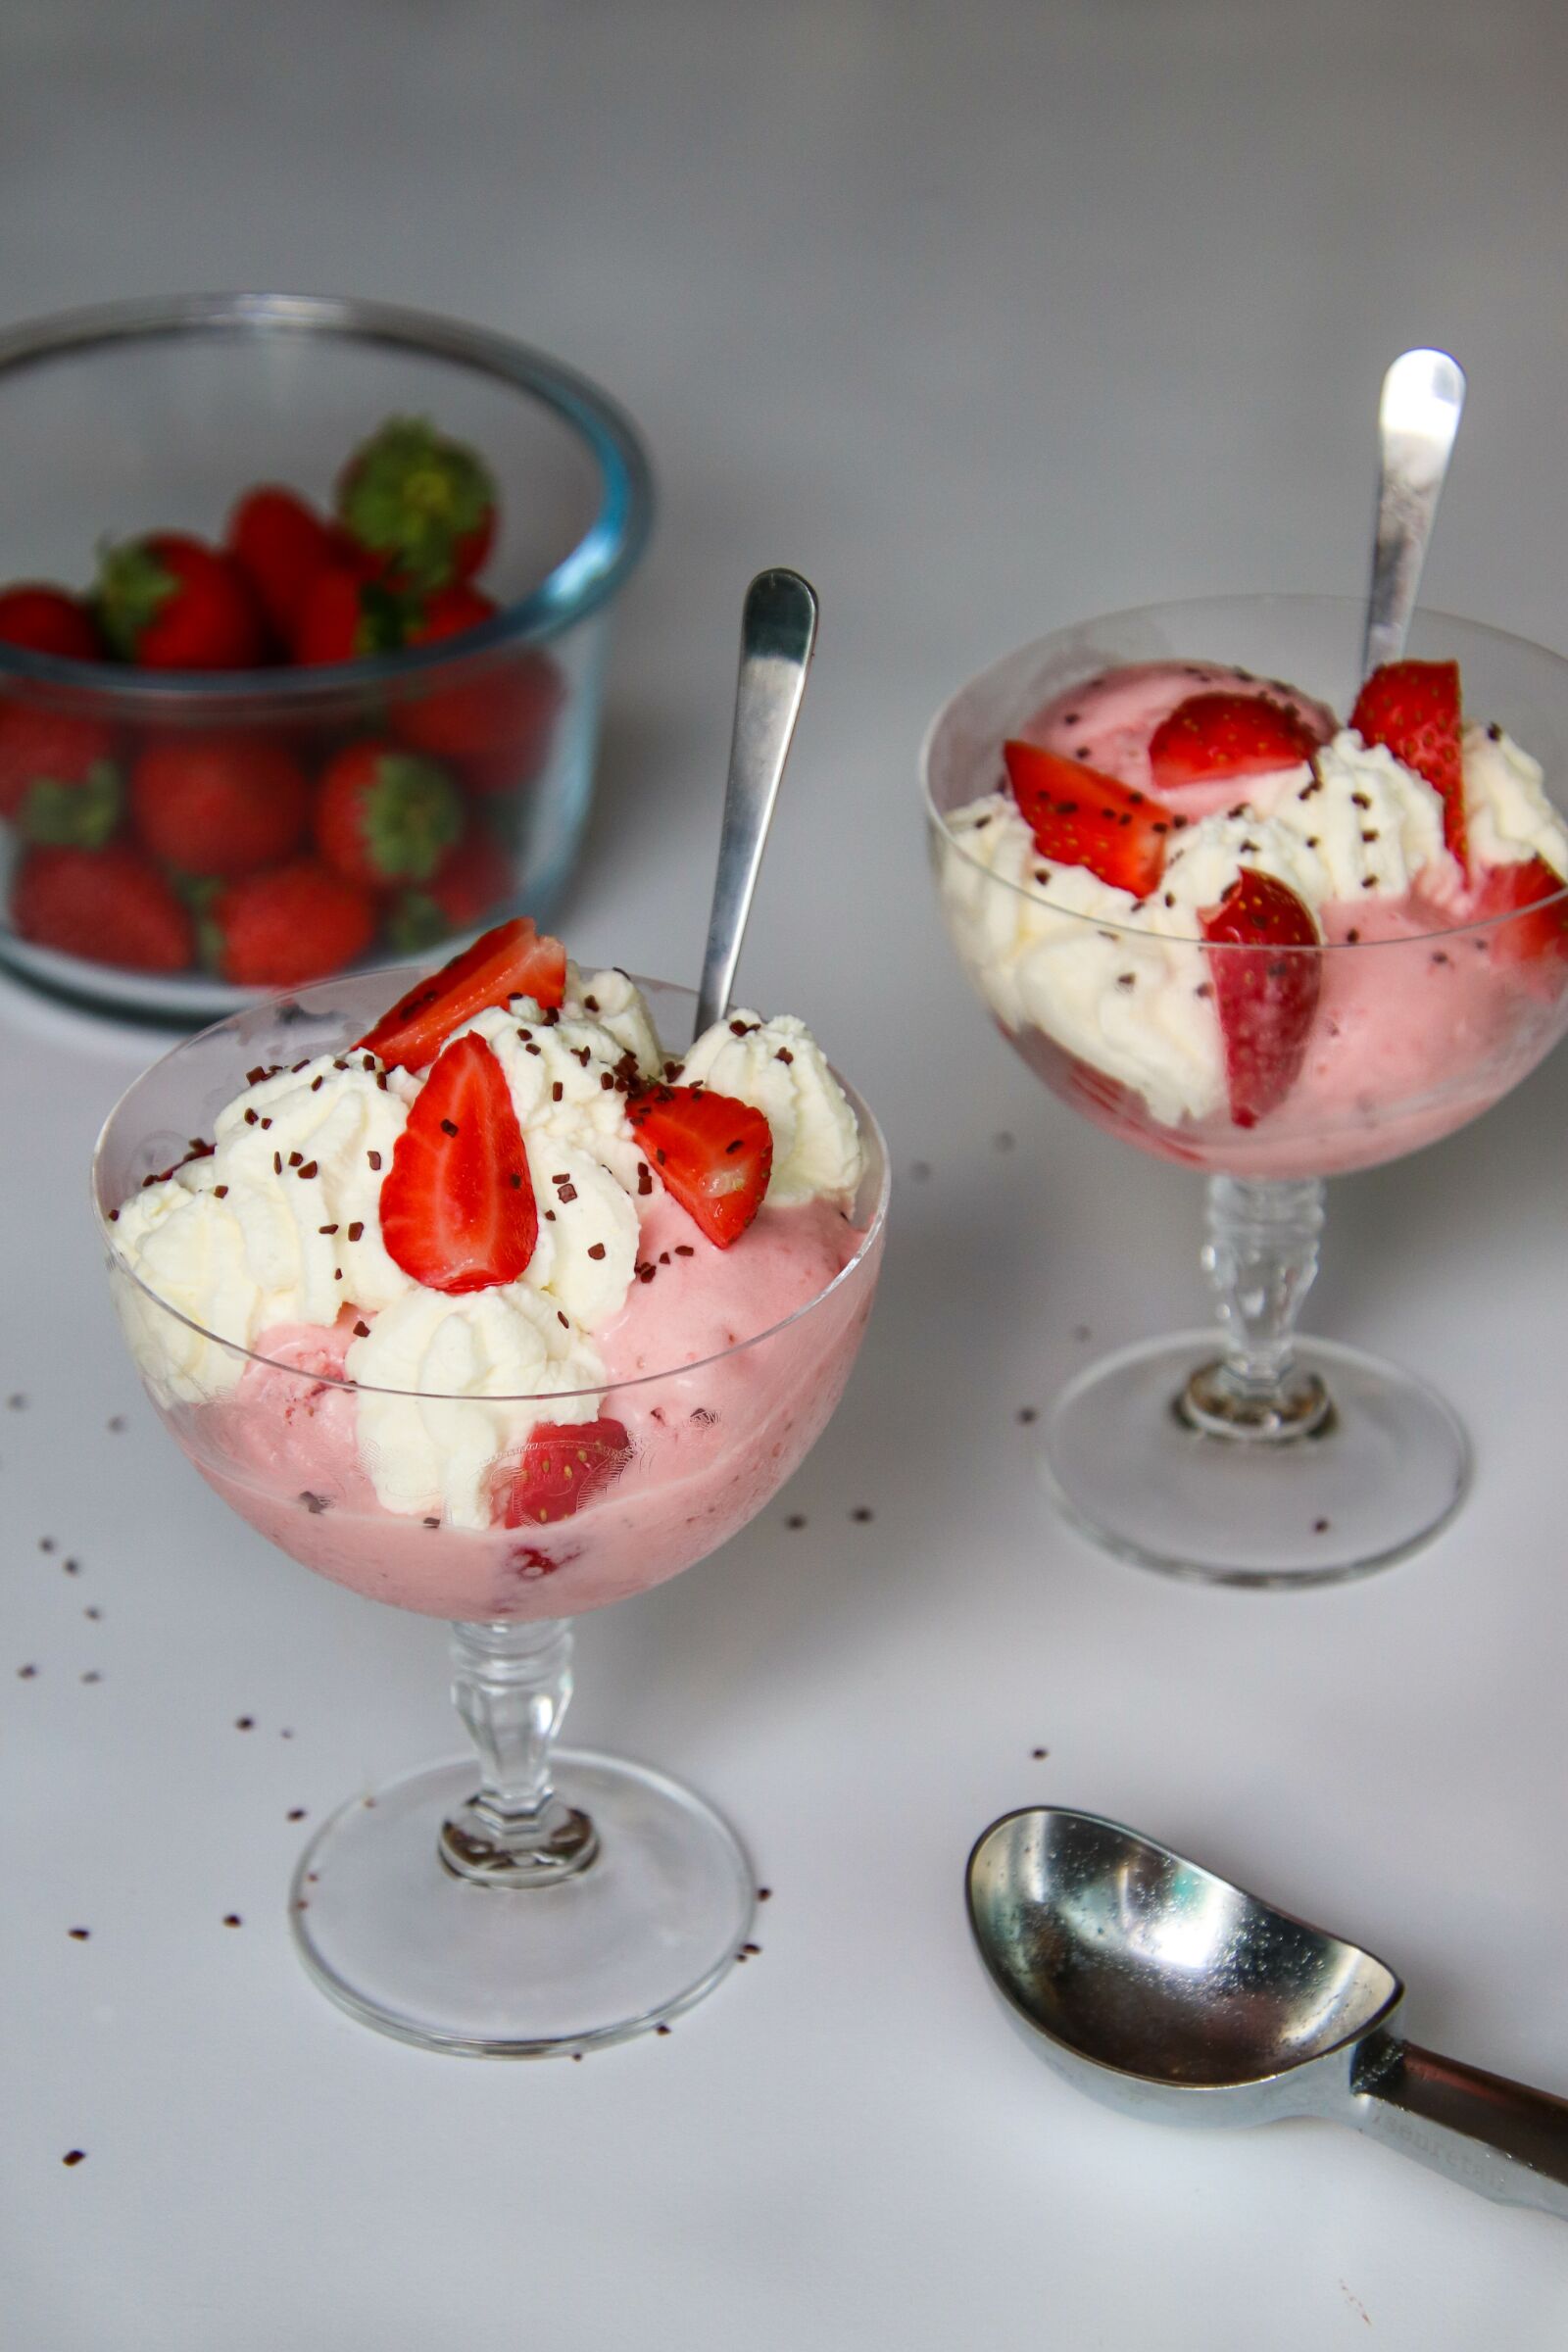 Tamron 18-400mm F3.5-6.3 Di II VC HLD sample photo. Strawberry, ice cream, whipped photography